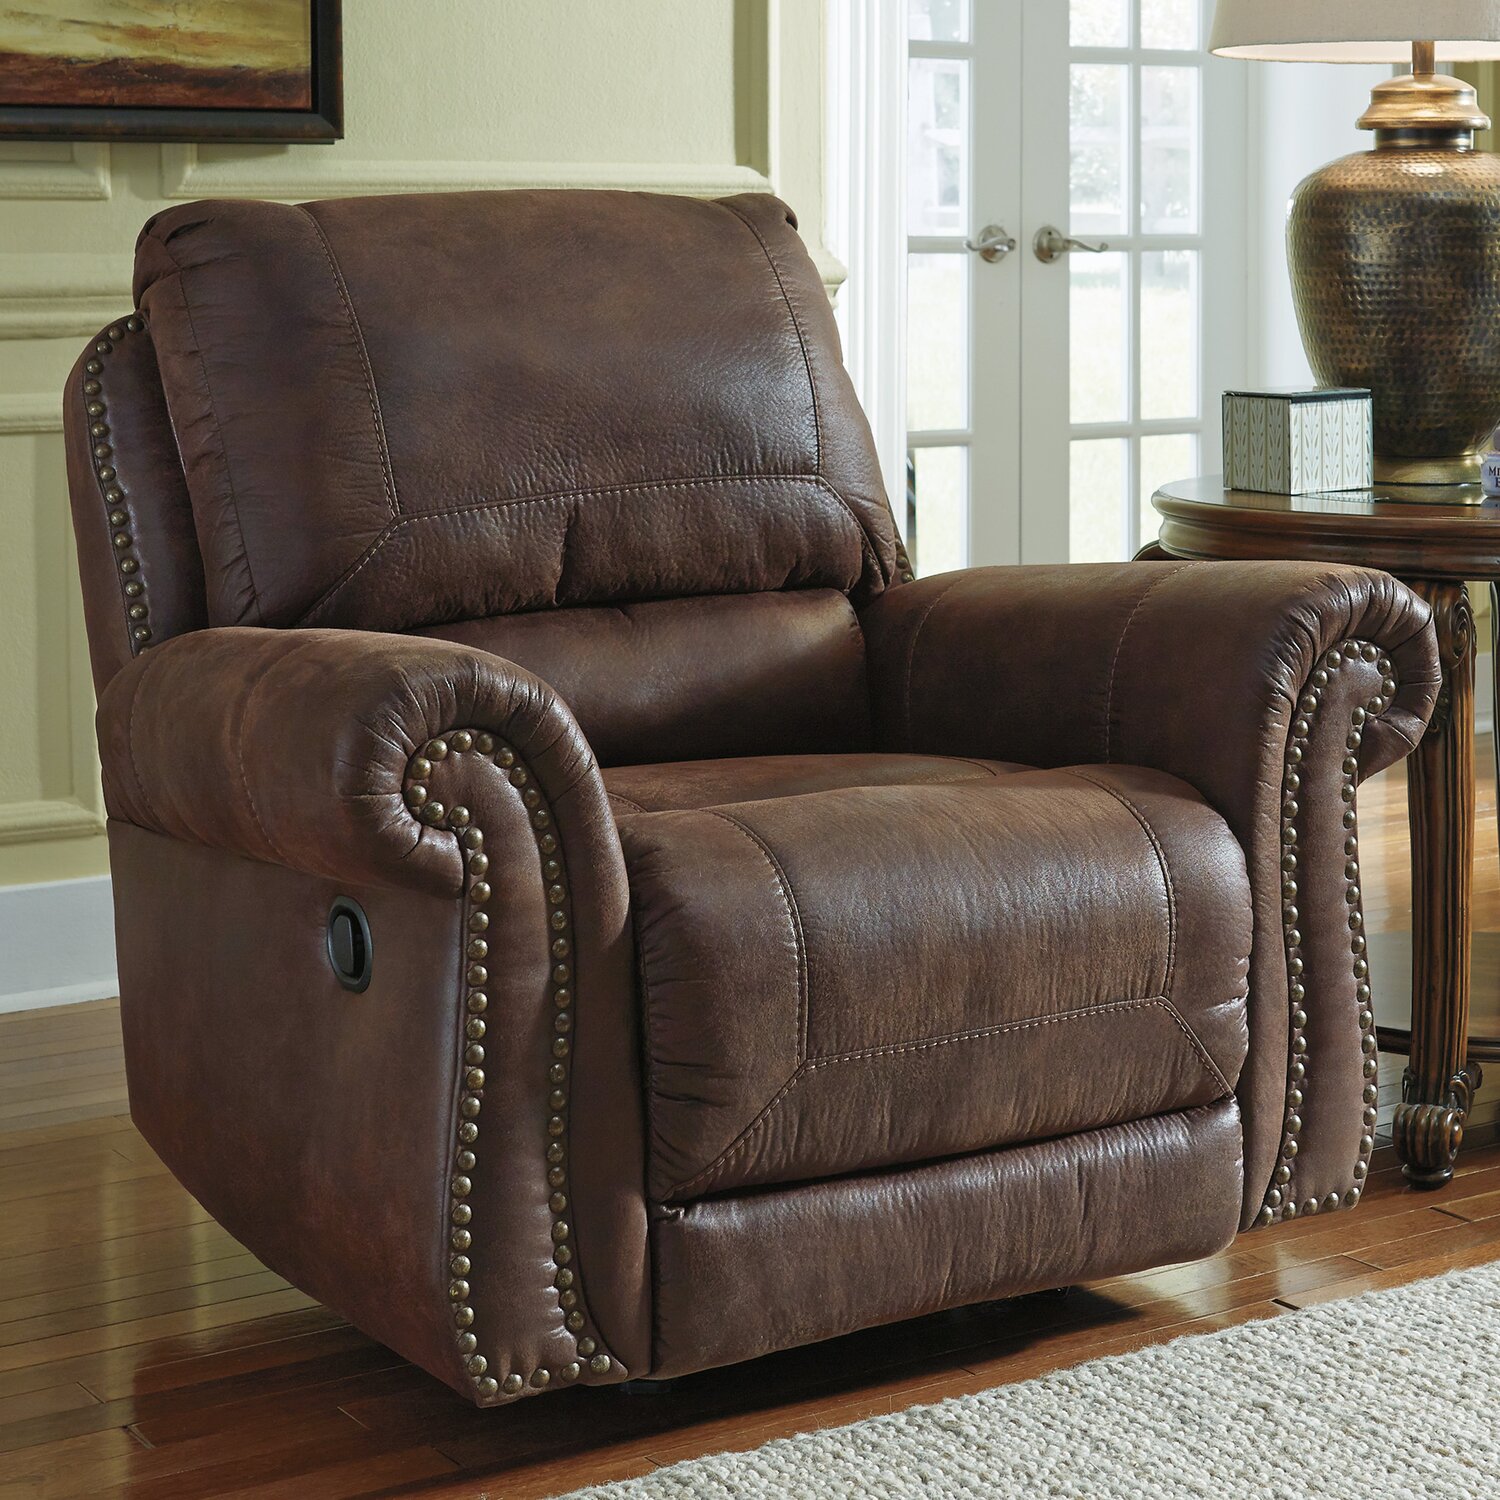 Recliner Chairs Laneaposs Best Recliners Lane Furniture